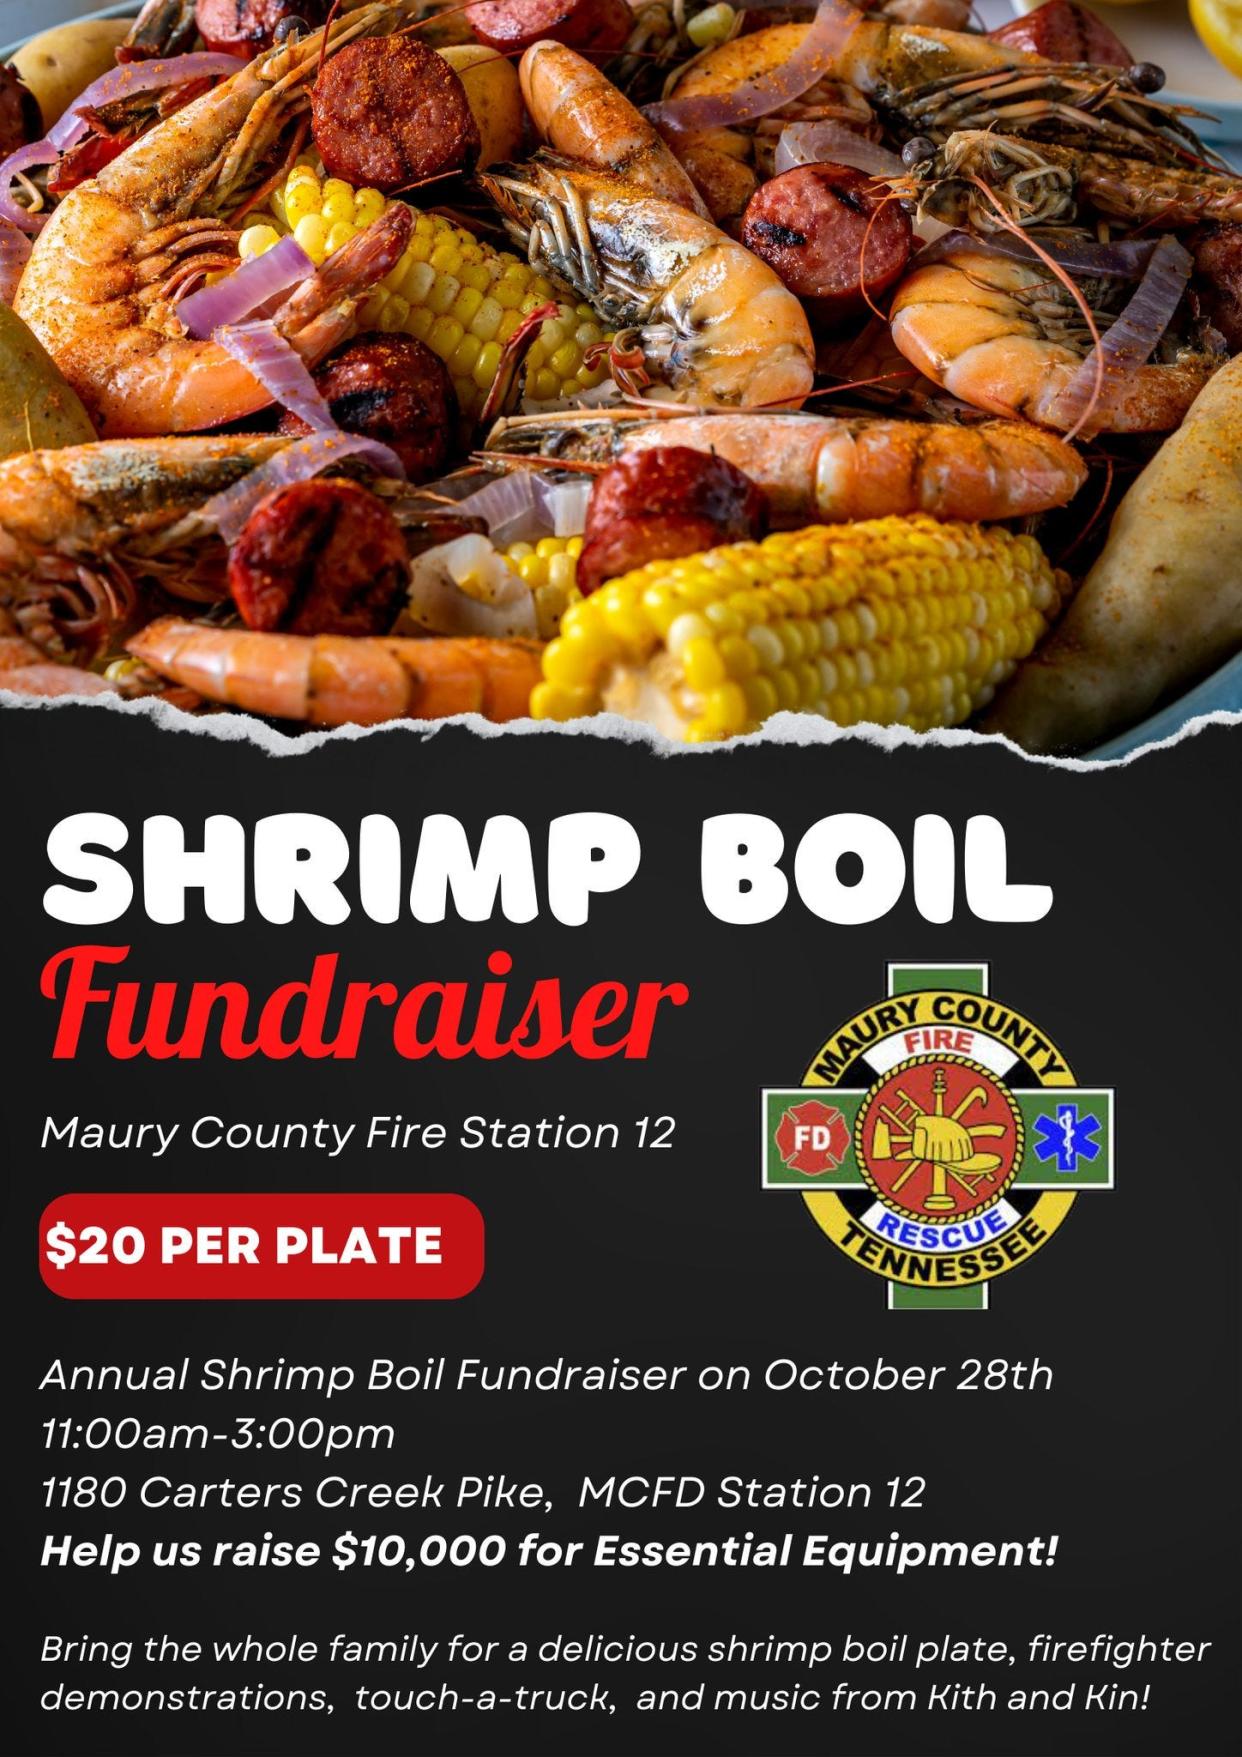 The annual Maury County Fire Department Shrimp Boil fundraiser will take place Saturday at MCFD Station 12, which will include shrimp plates, live music and more.